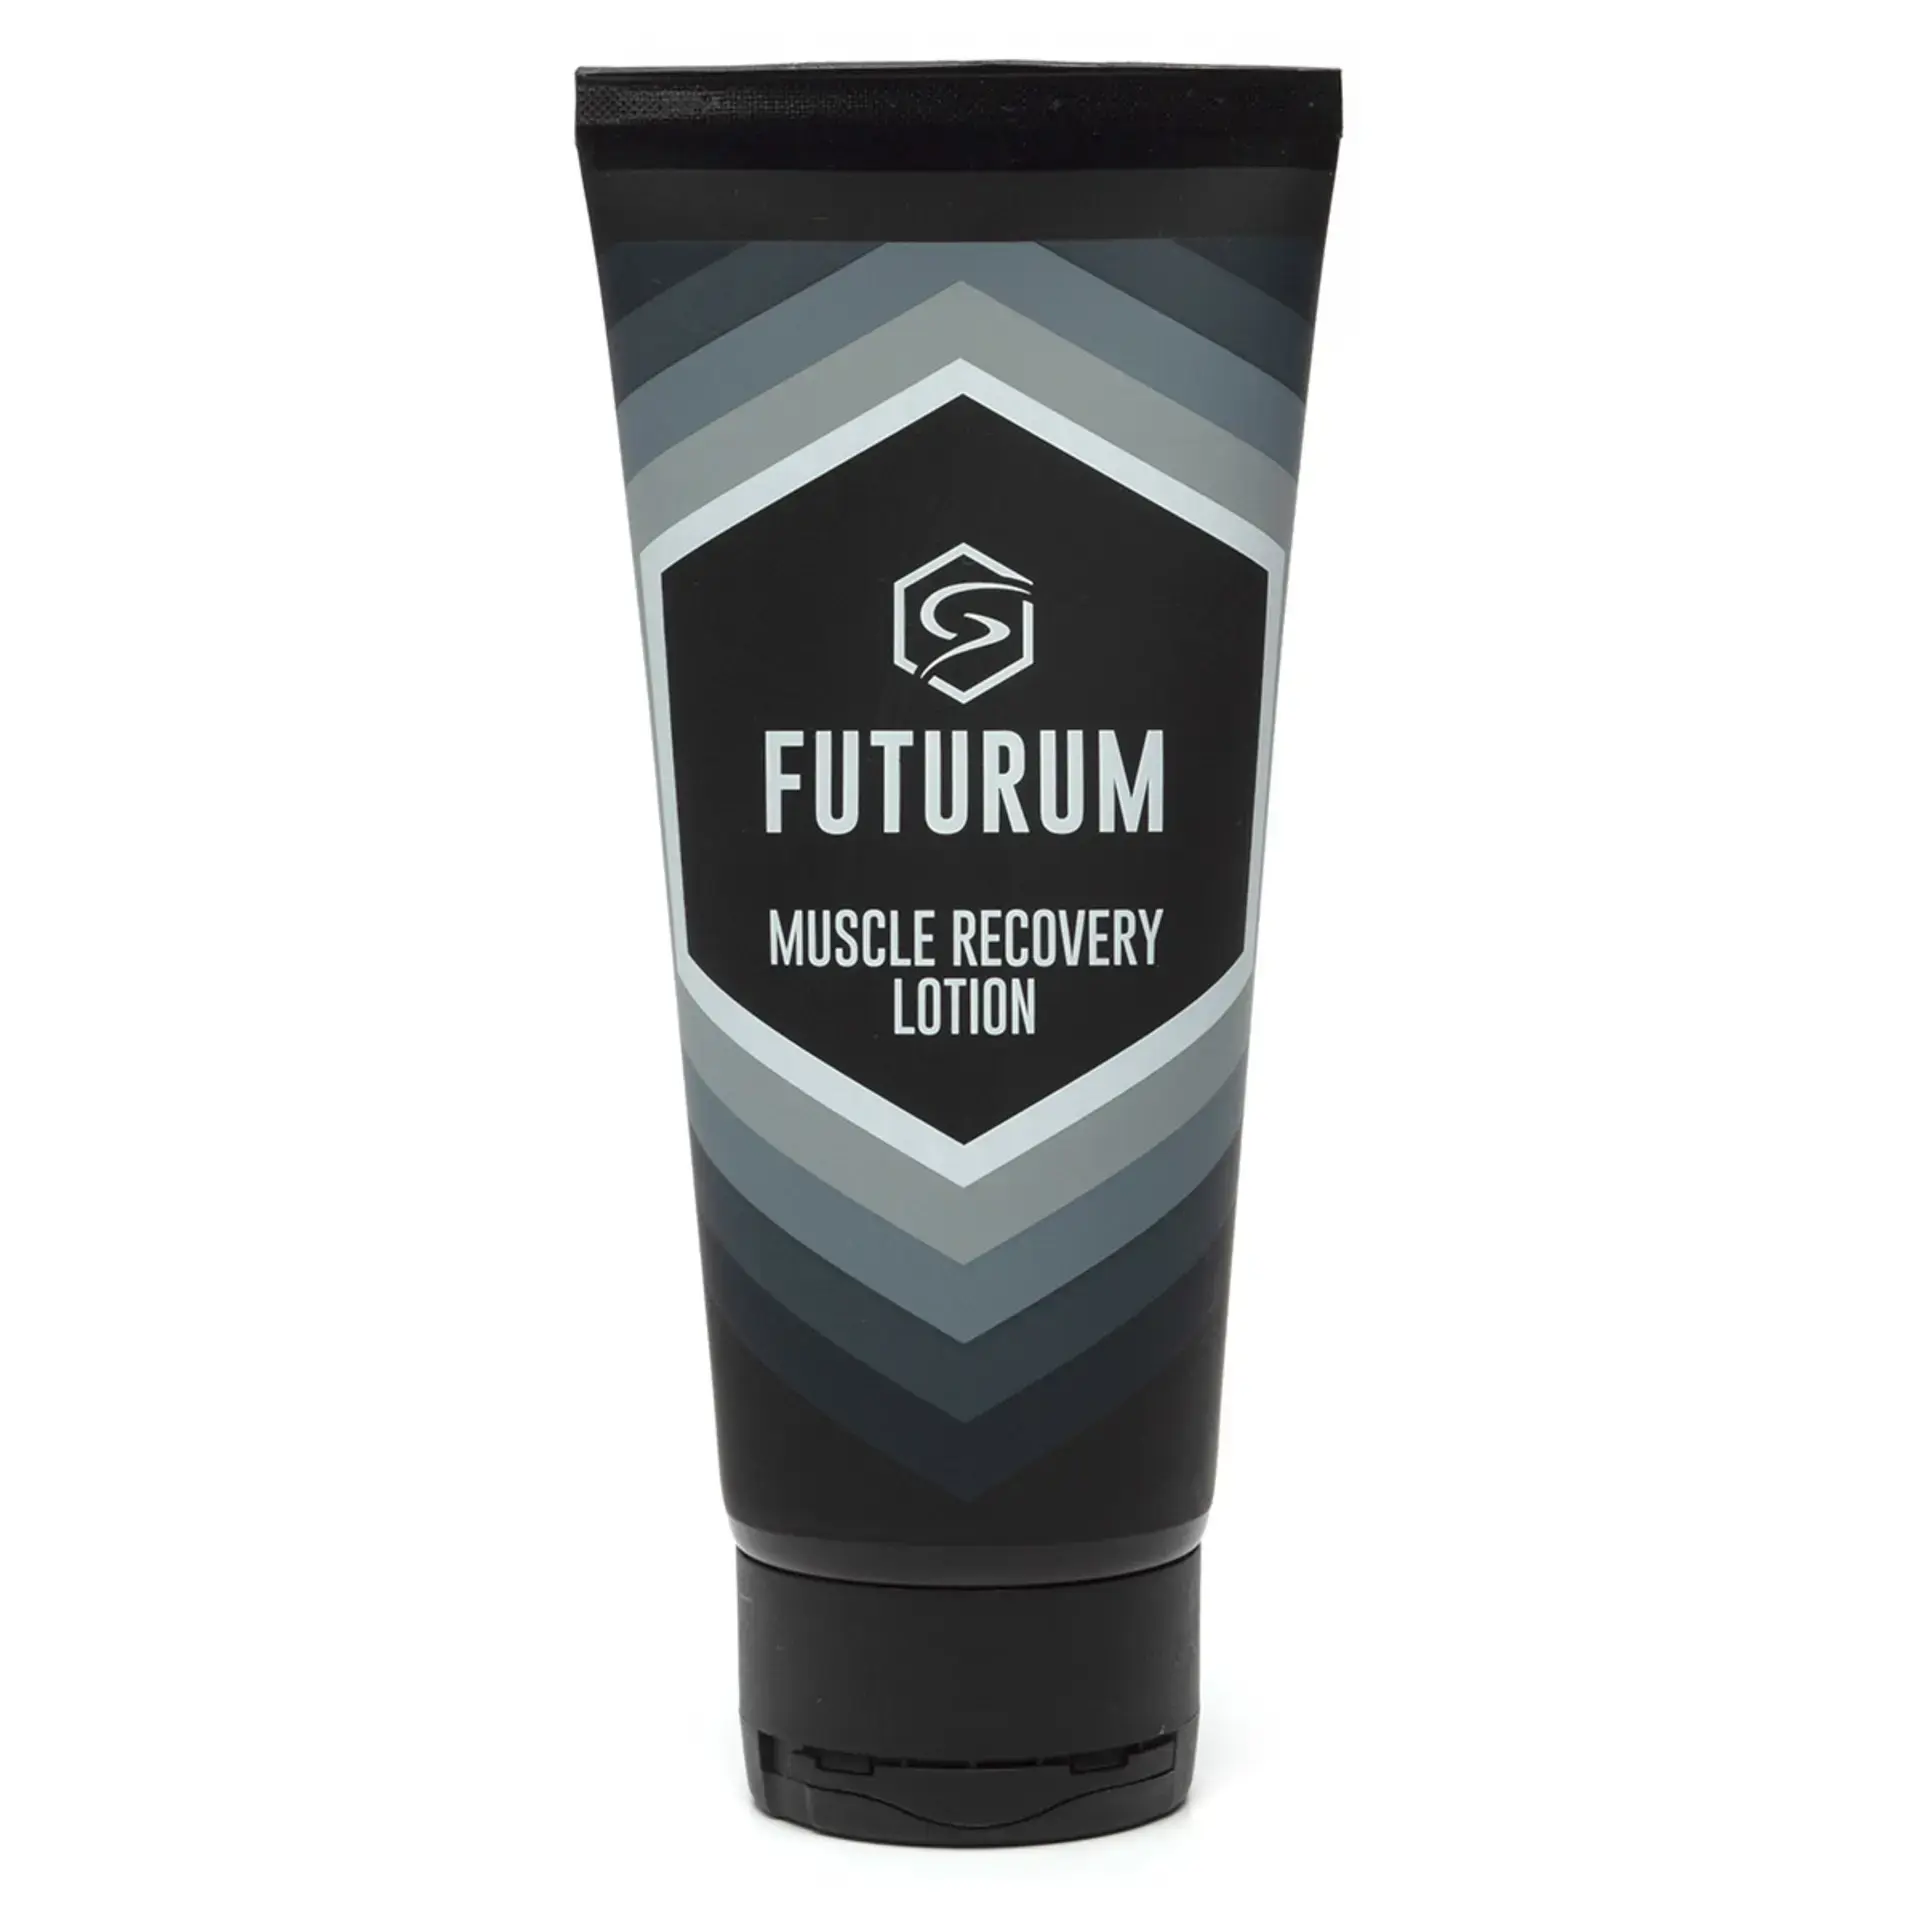 FUTURUM Muscle Recovery Lotion